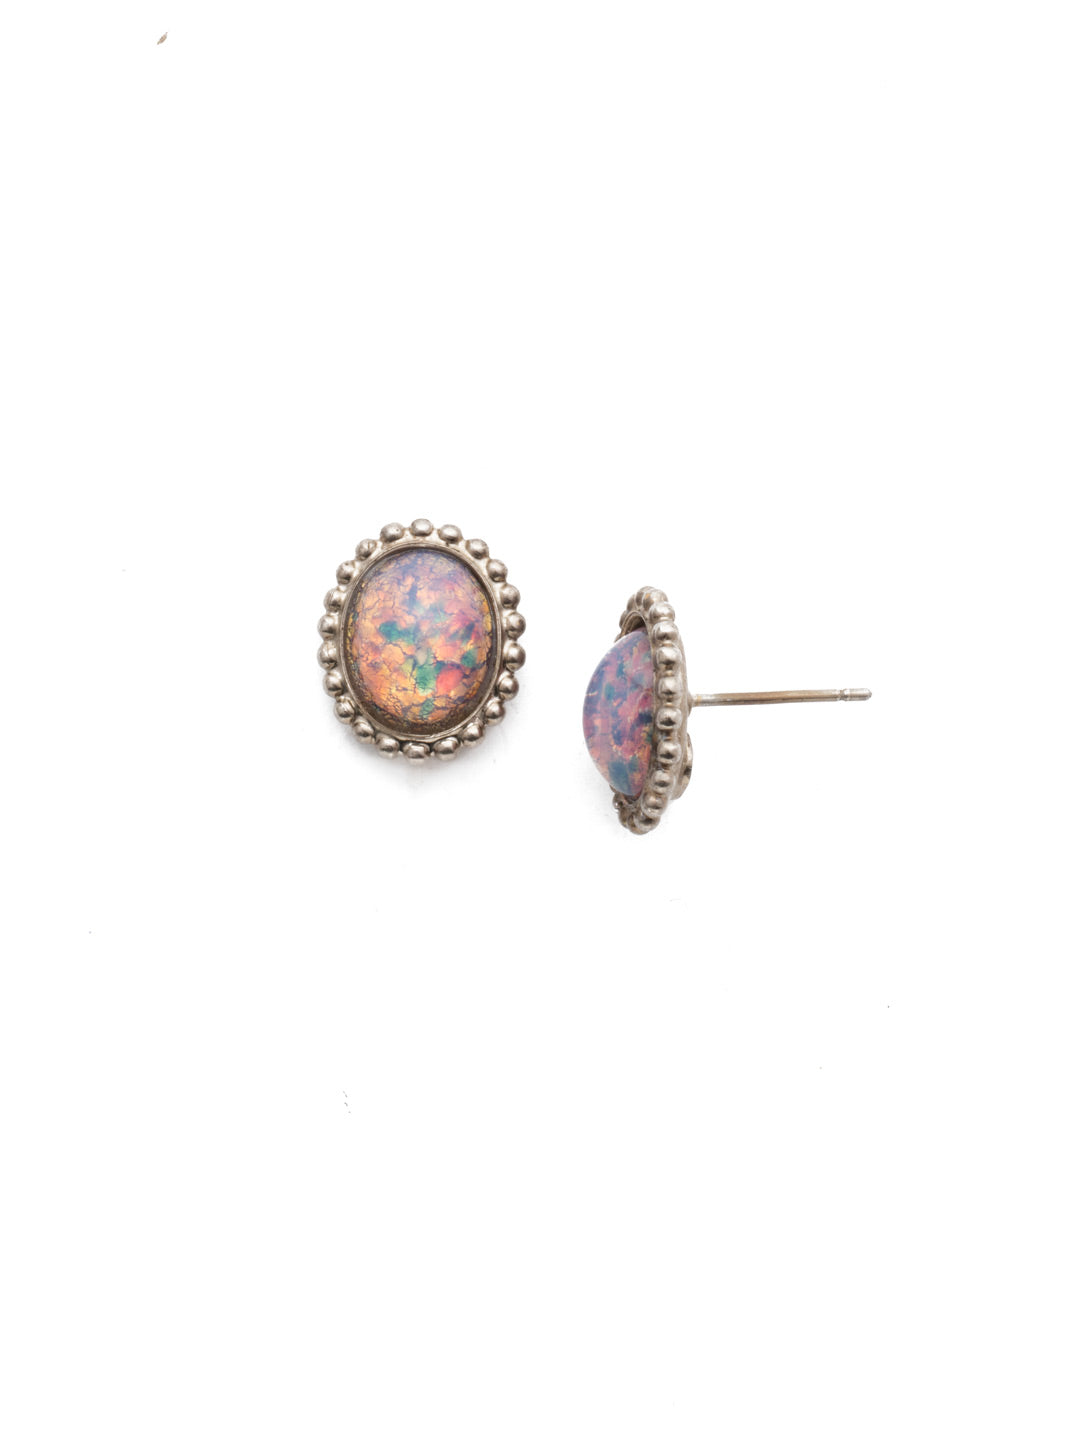 Oval-Cut Solitaire Stud Earrings - EDQ10ASETP - These simple stud earrings feature a beautiful oval crystal surrounded by a decorative edged border. From Sorrelli's Electric Pink collection in our Antique Silver-tone finish.